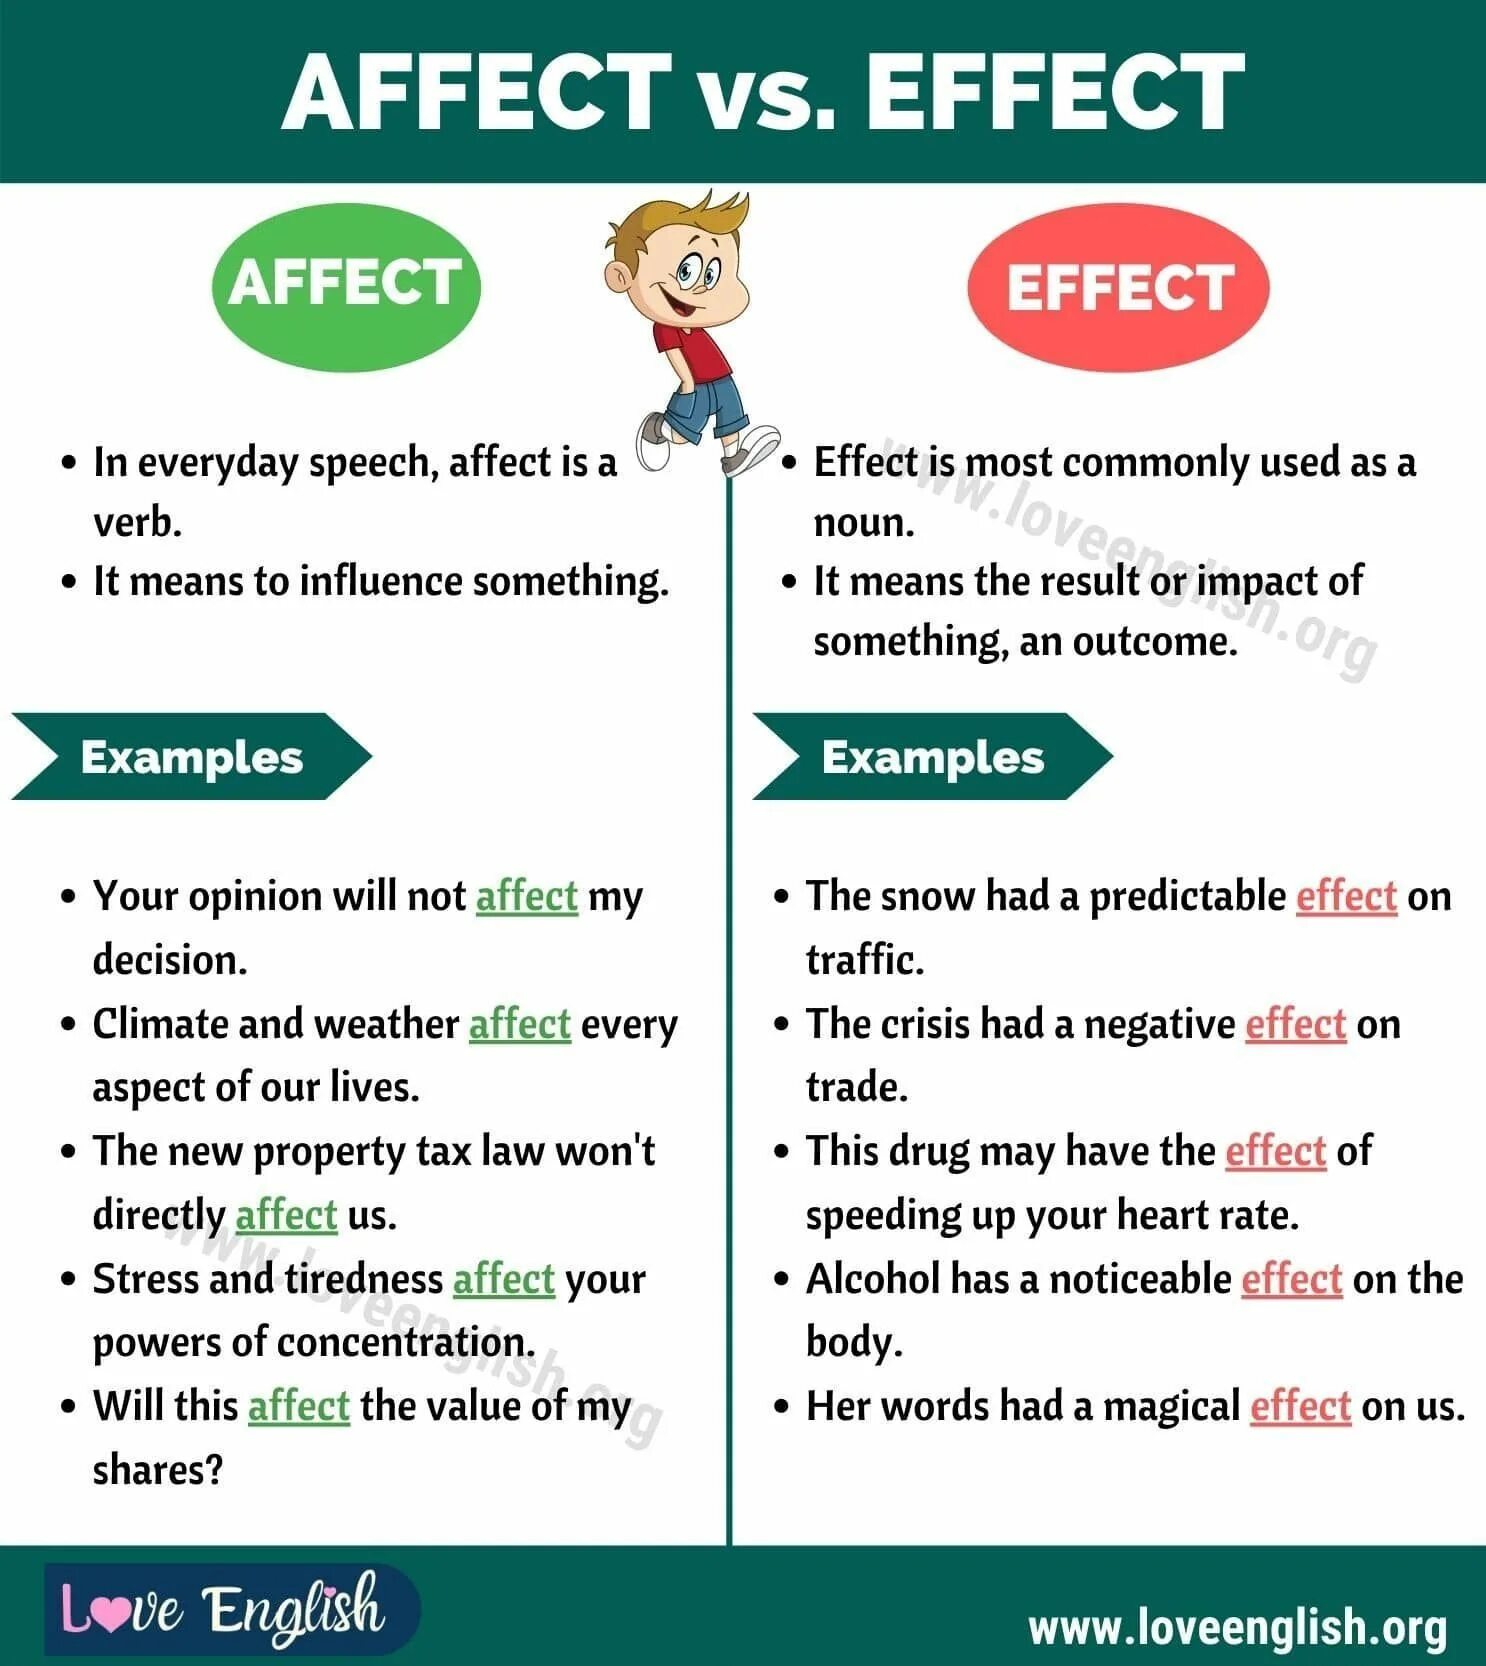 Effects effects разница. Affect Effect. Affect vs Effect. Affect или Effect разница. Effected affected разница.